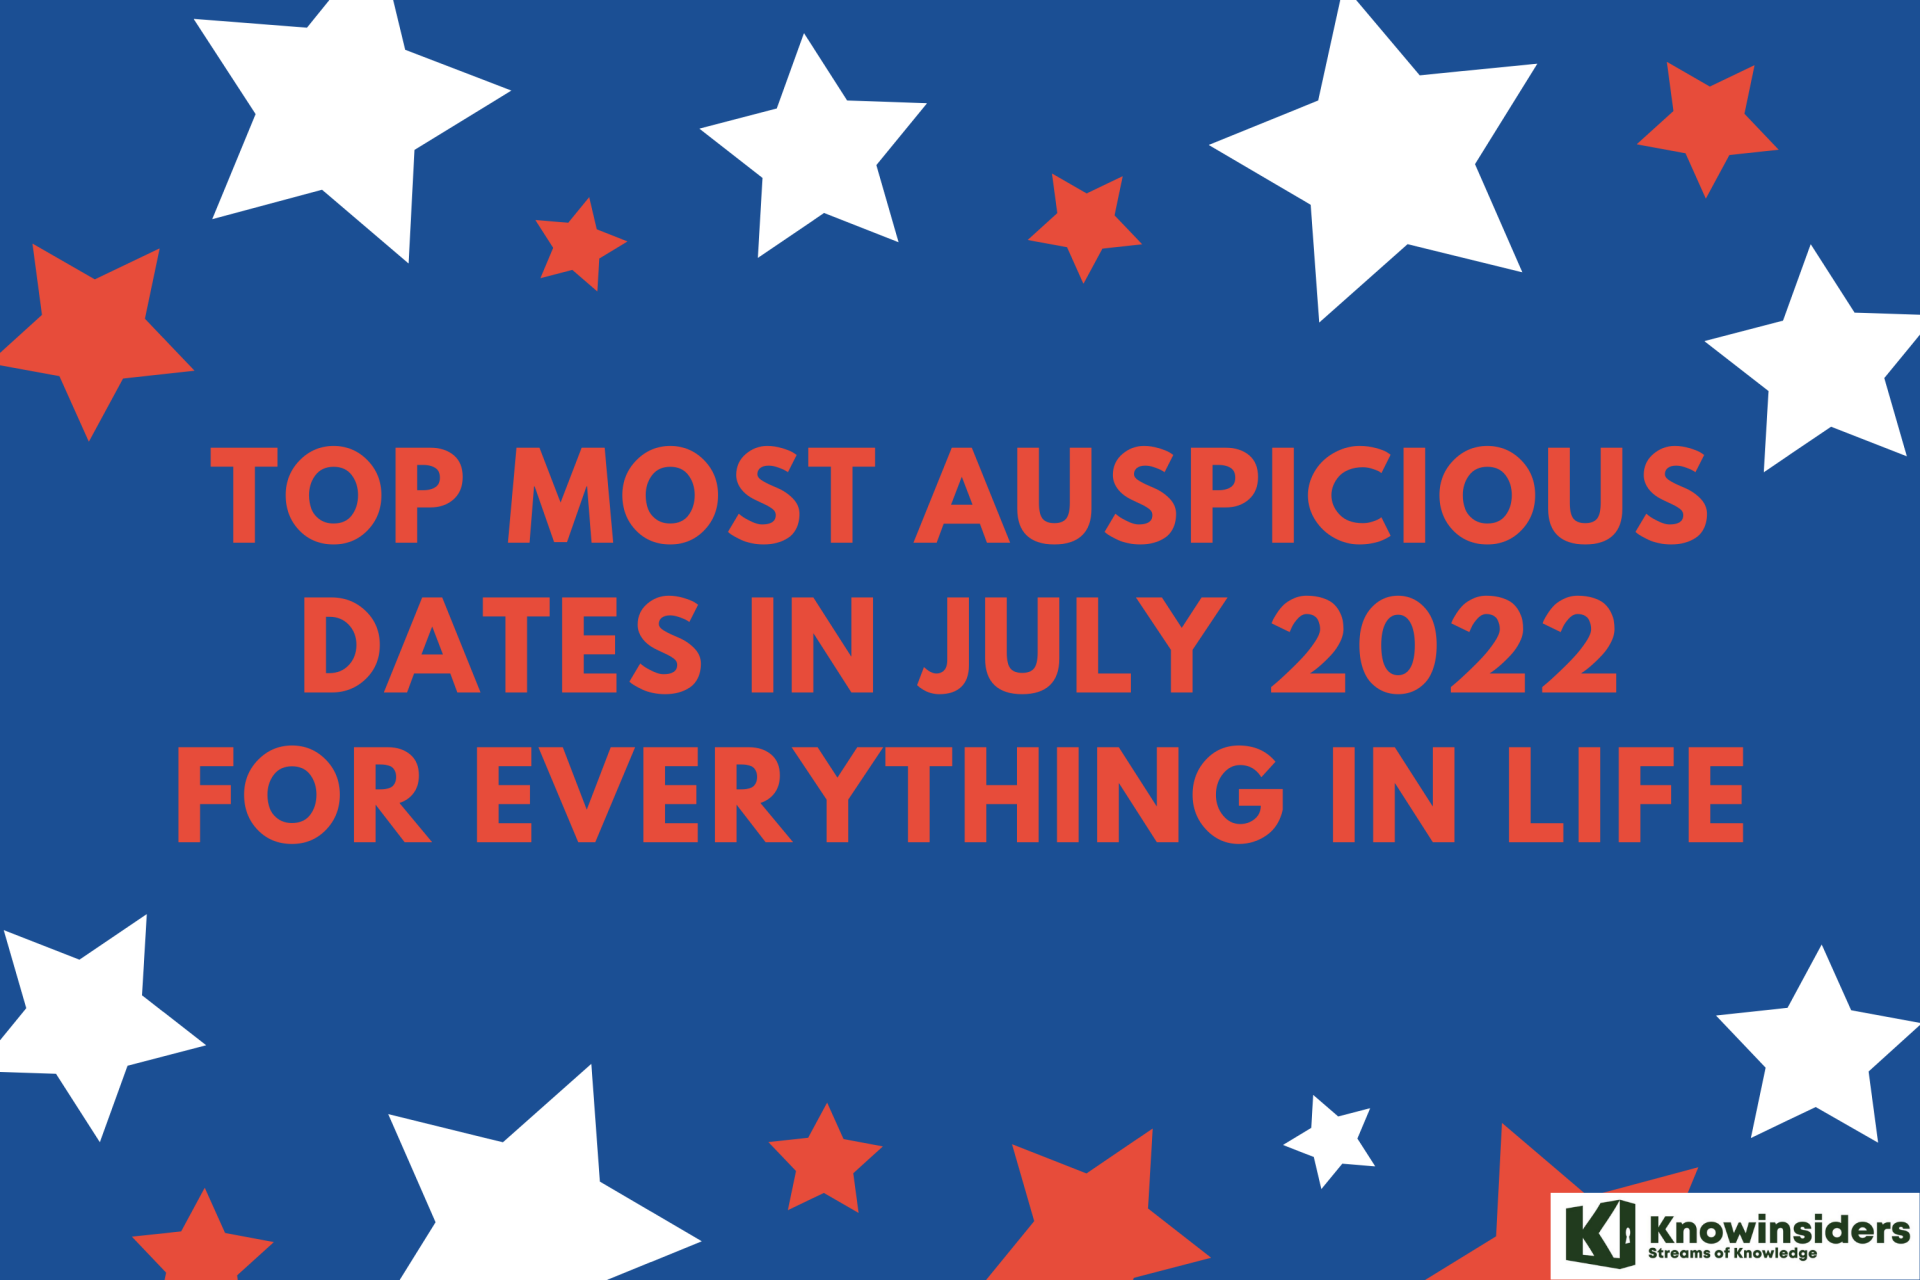 Top Most Auspicious Dates In July 2022 For Everything in Life